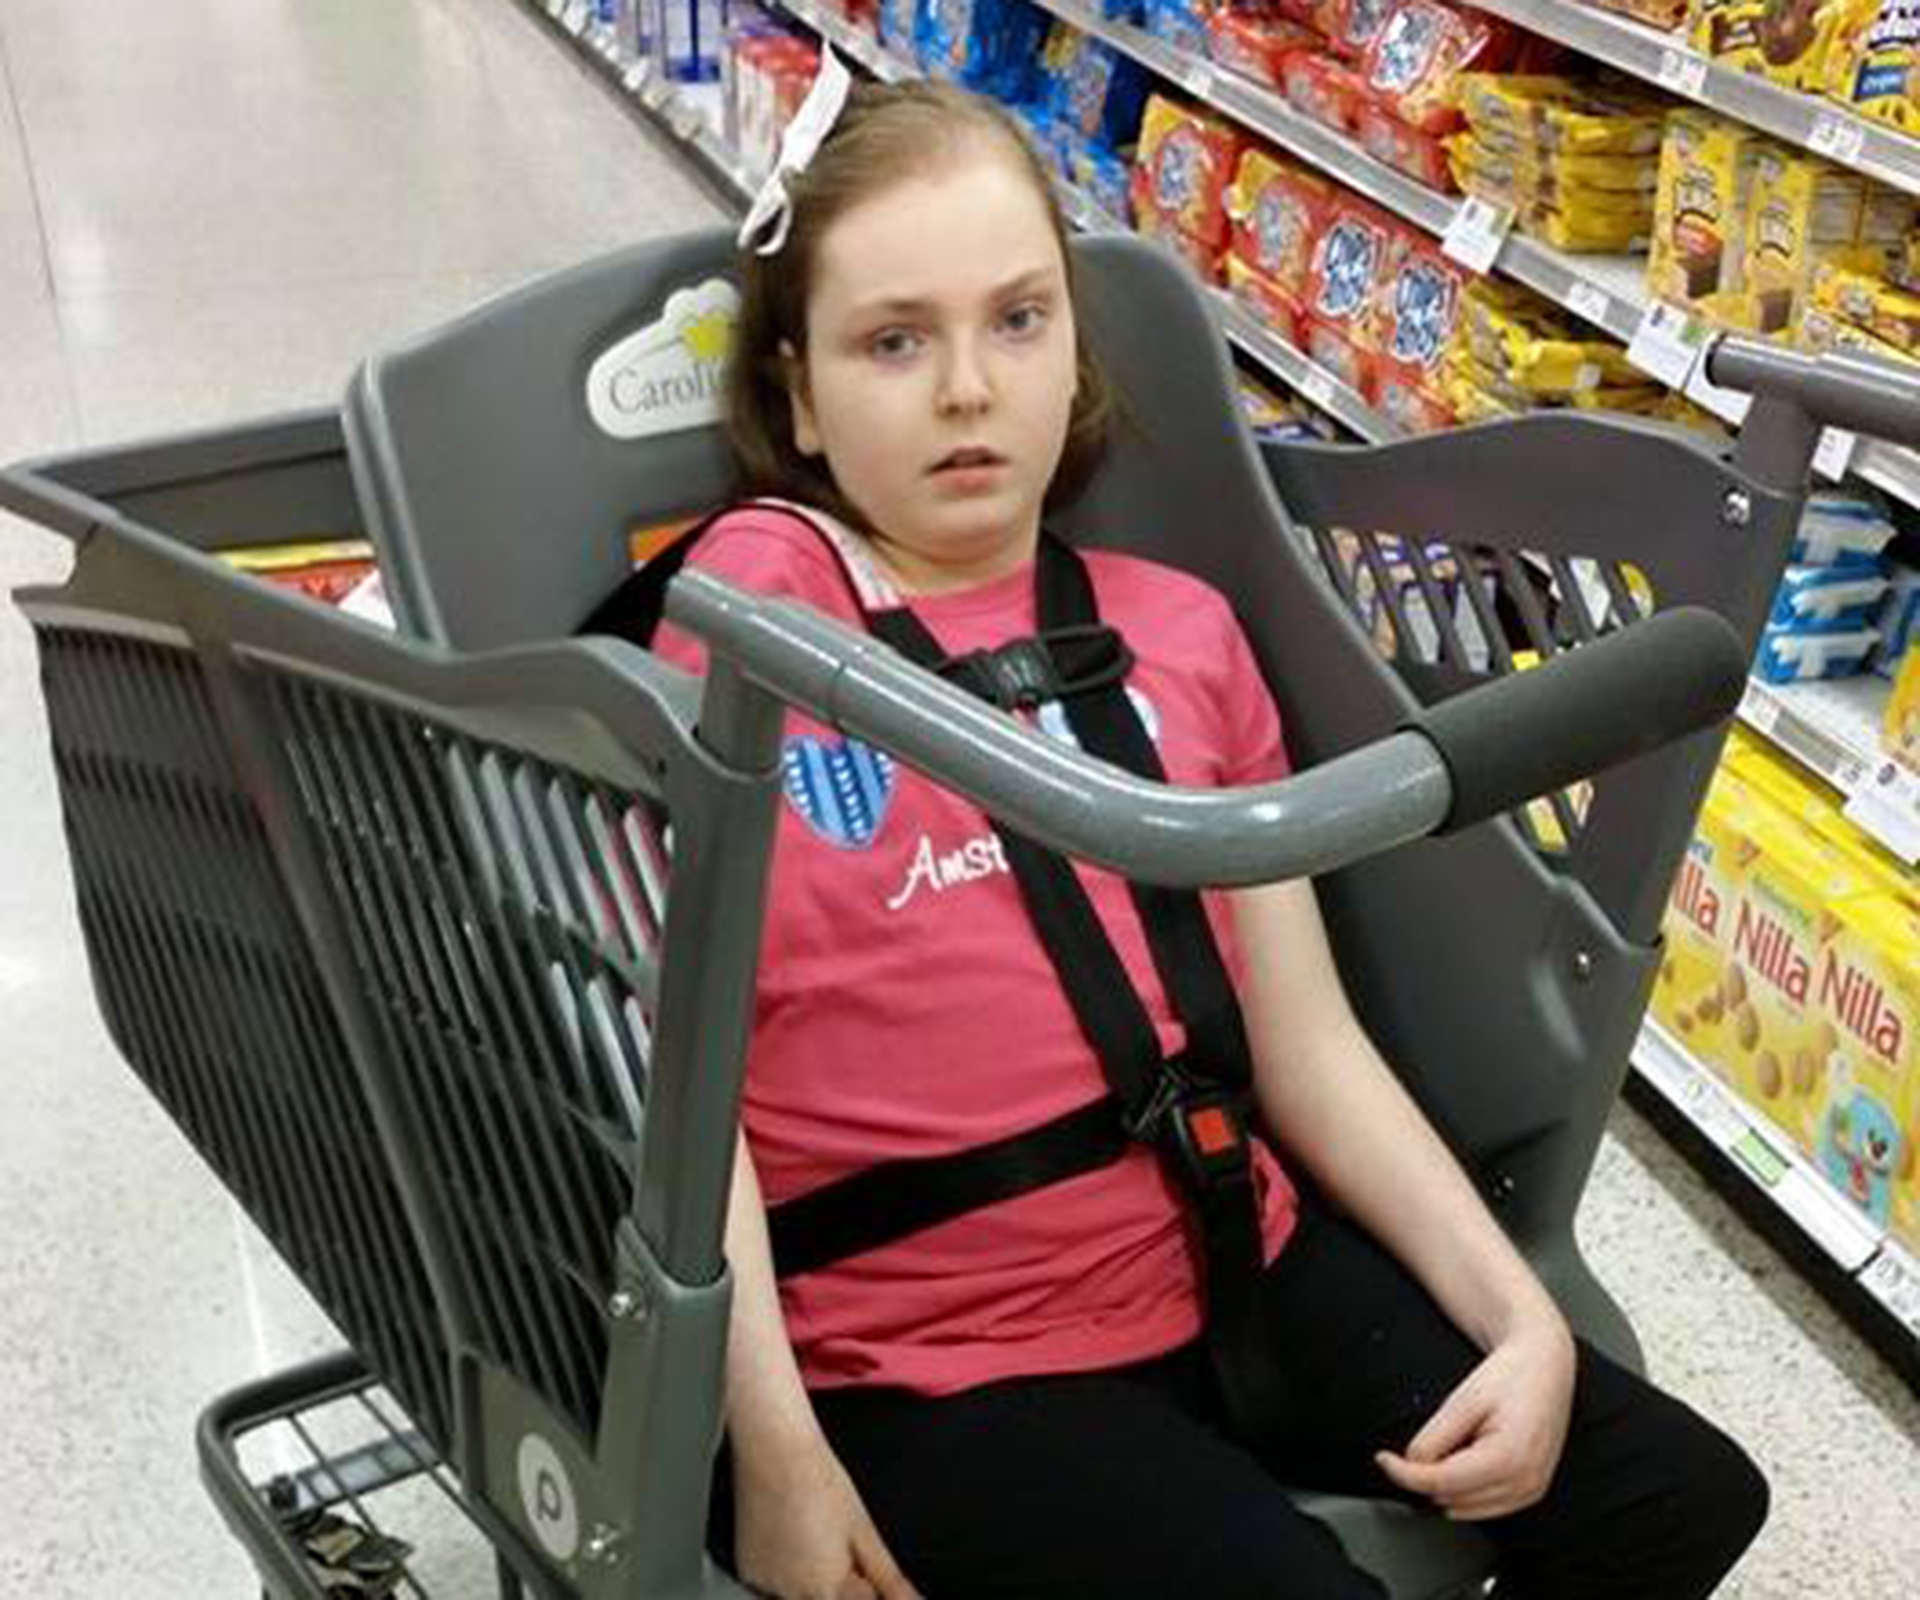 Mother of a child with special needs invents shopping trolley for disabled kids and seniors